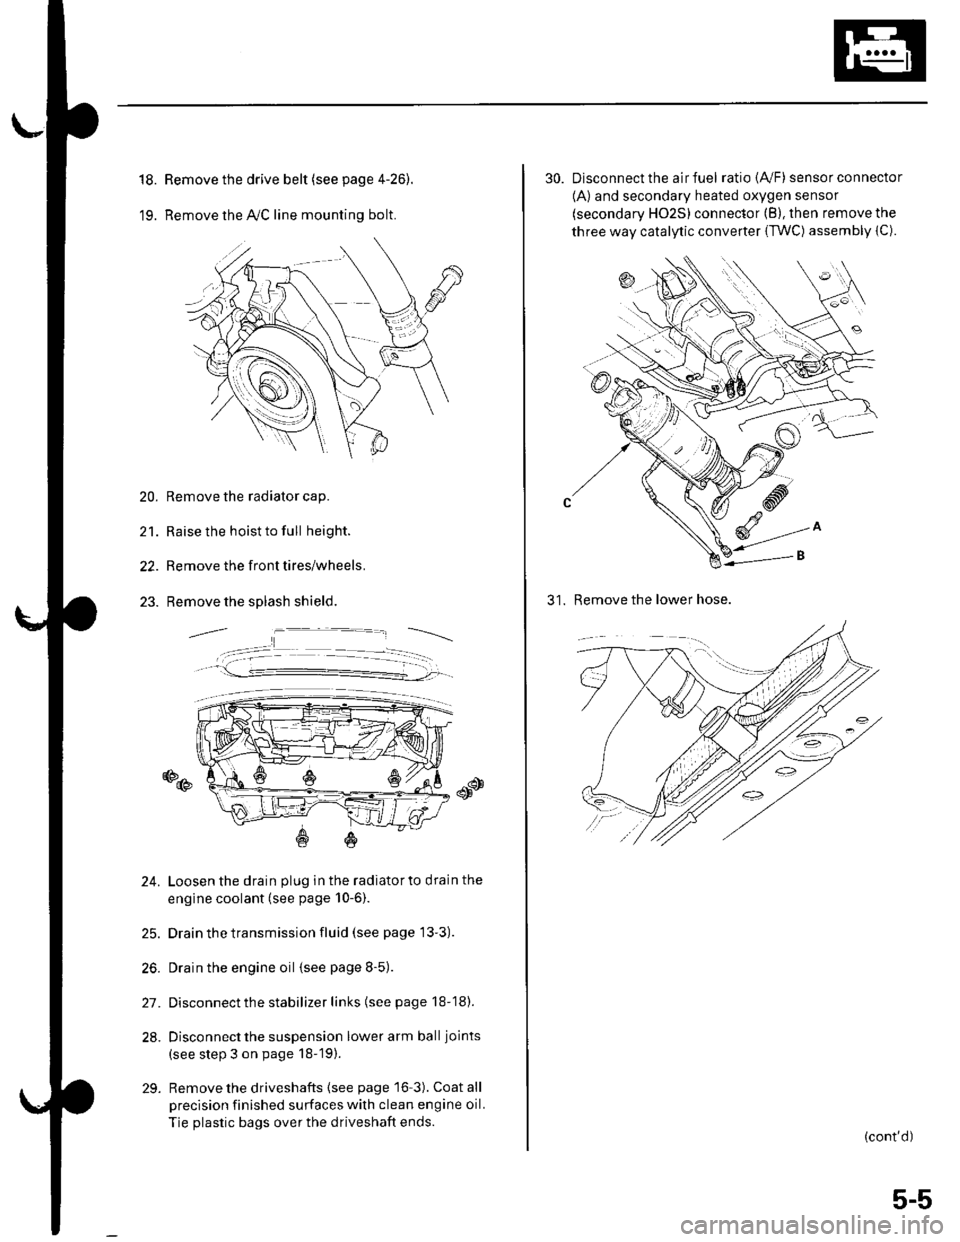 HONDA CIVIC 2003 7.G User Guide 18.
19.
Remove the drive belt (see page 4-26).
Remove the lvC line mounting bolt.
20. Remove the radiator cap.
21. Raise the hoist to full height.
22. Remove the front tires/wheels.
23. Remove the spl